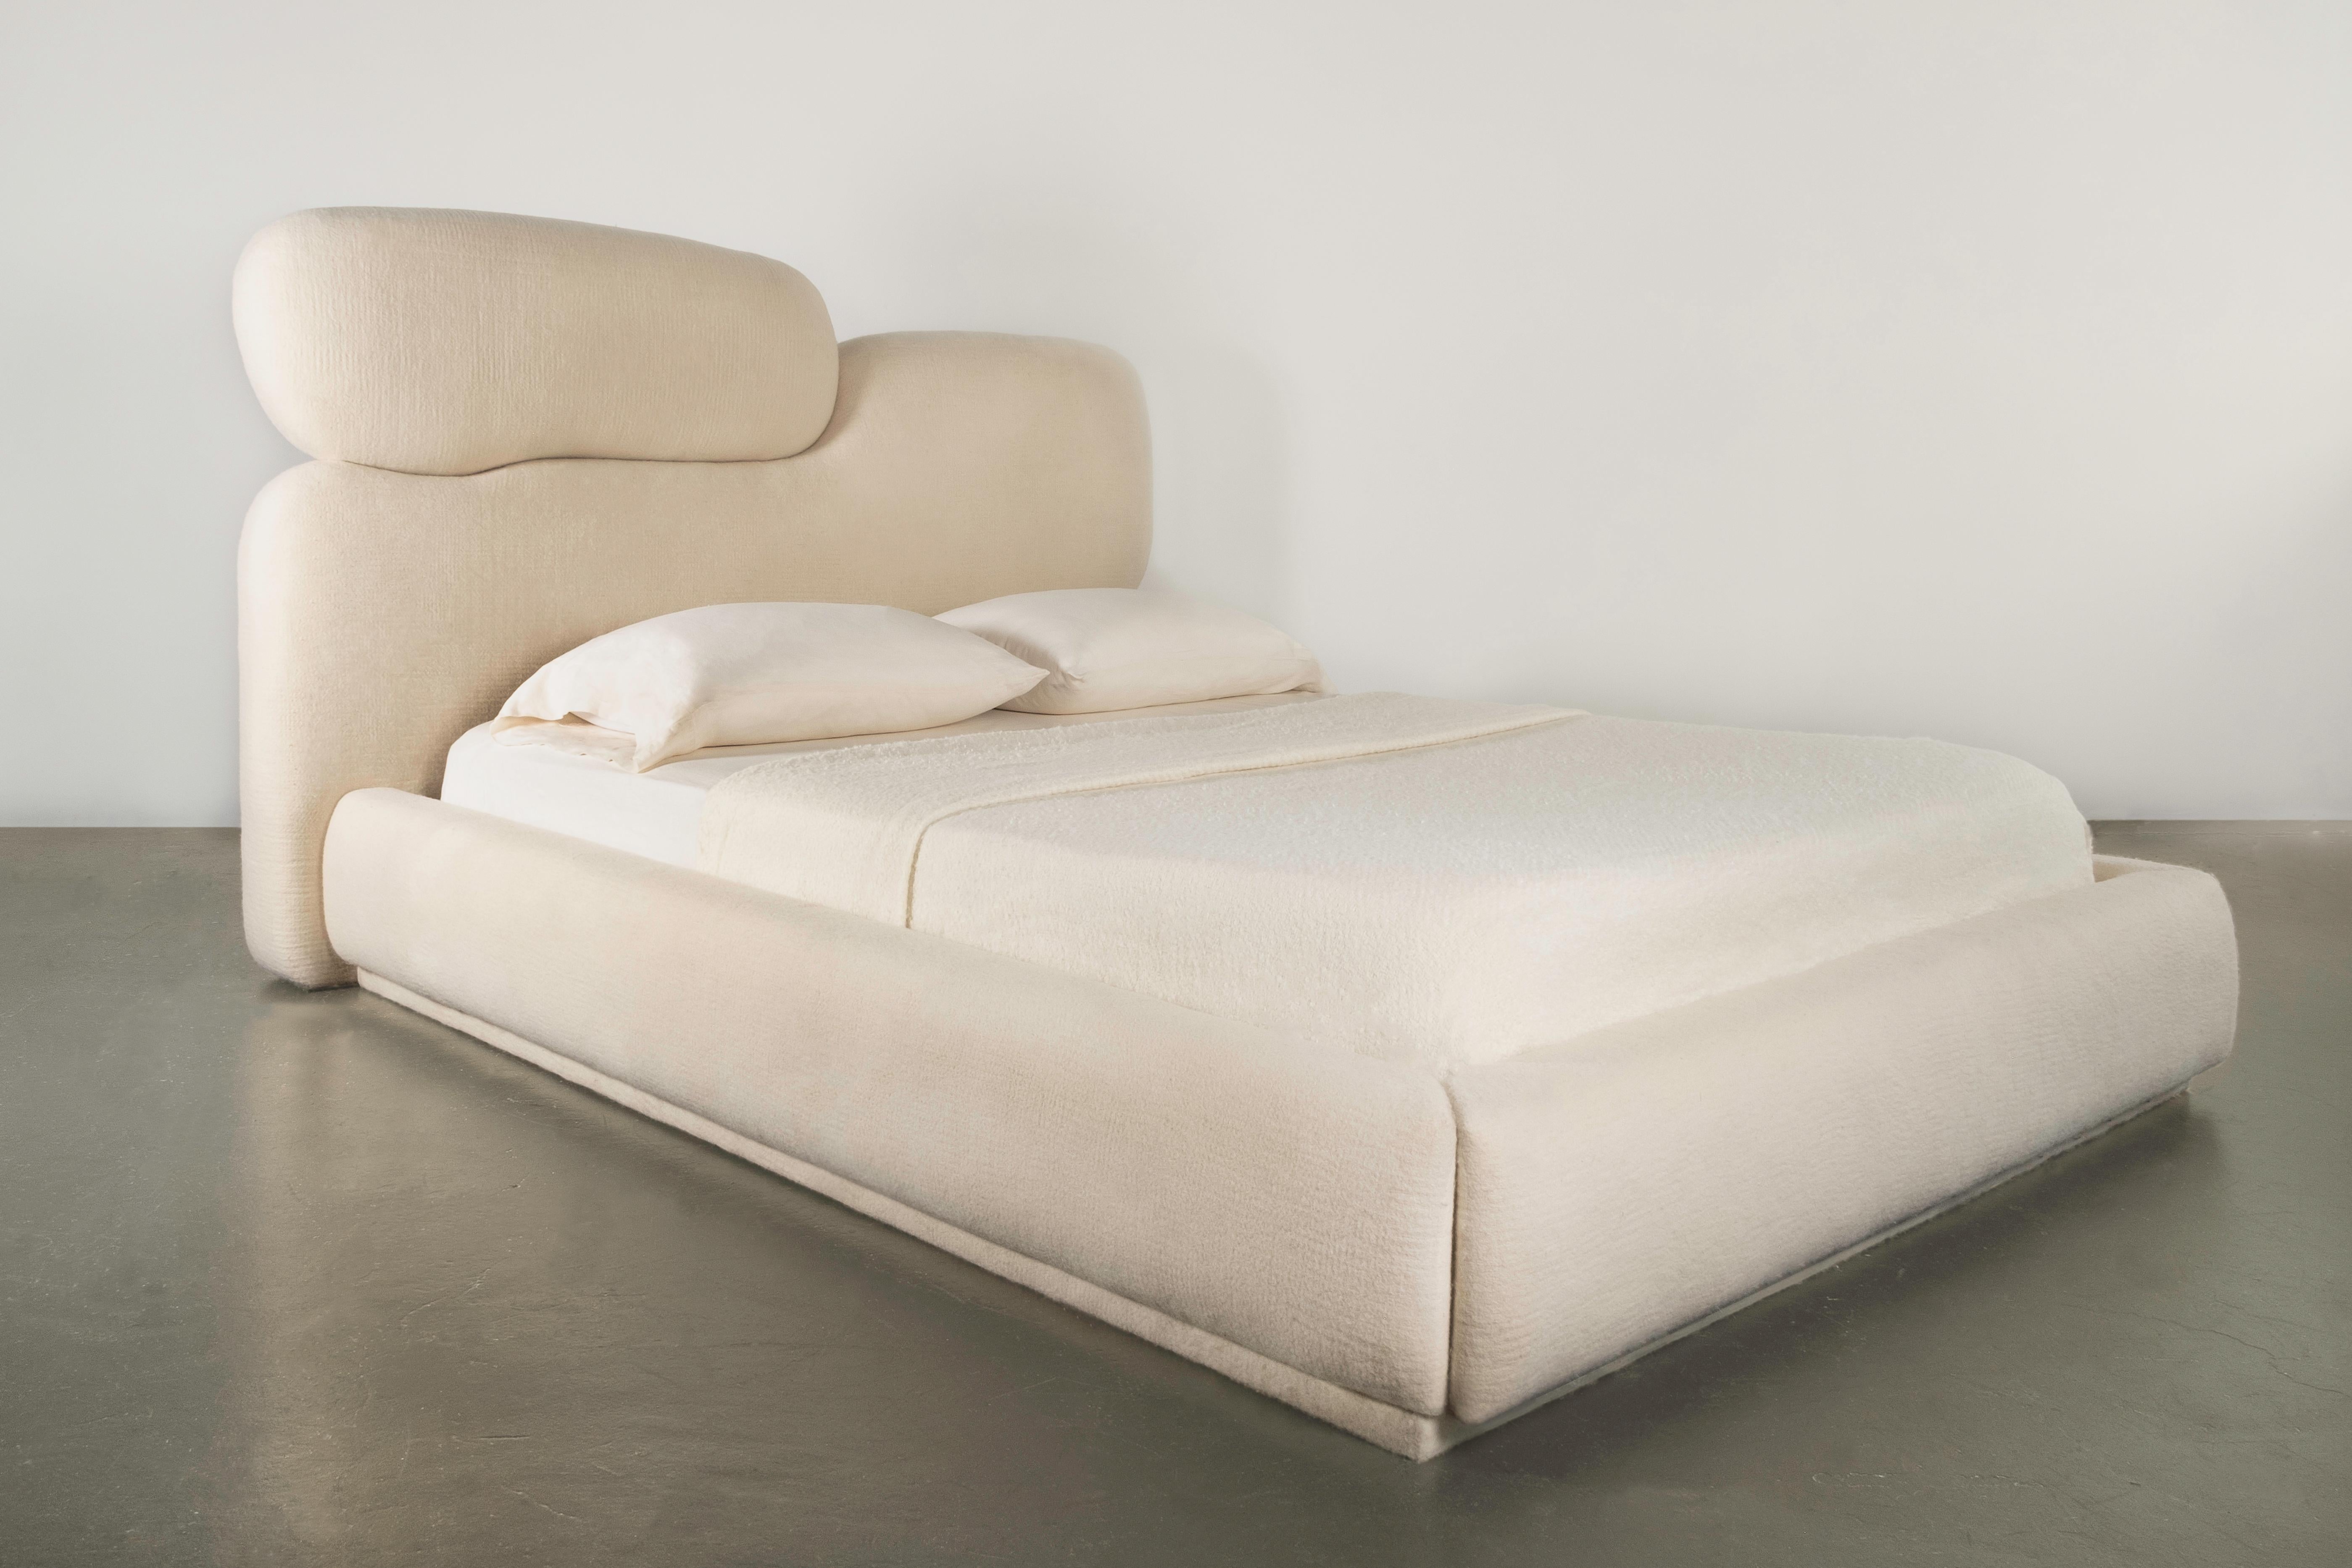 Sheep Bed designed by Studio Ahead. 

It is upholstered in custom cream merino wool felt from Northern California sheep. 

The shape of the headboard is inspired by the smooth lines of stones found on Muir Beach that has been washed by a current